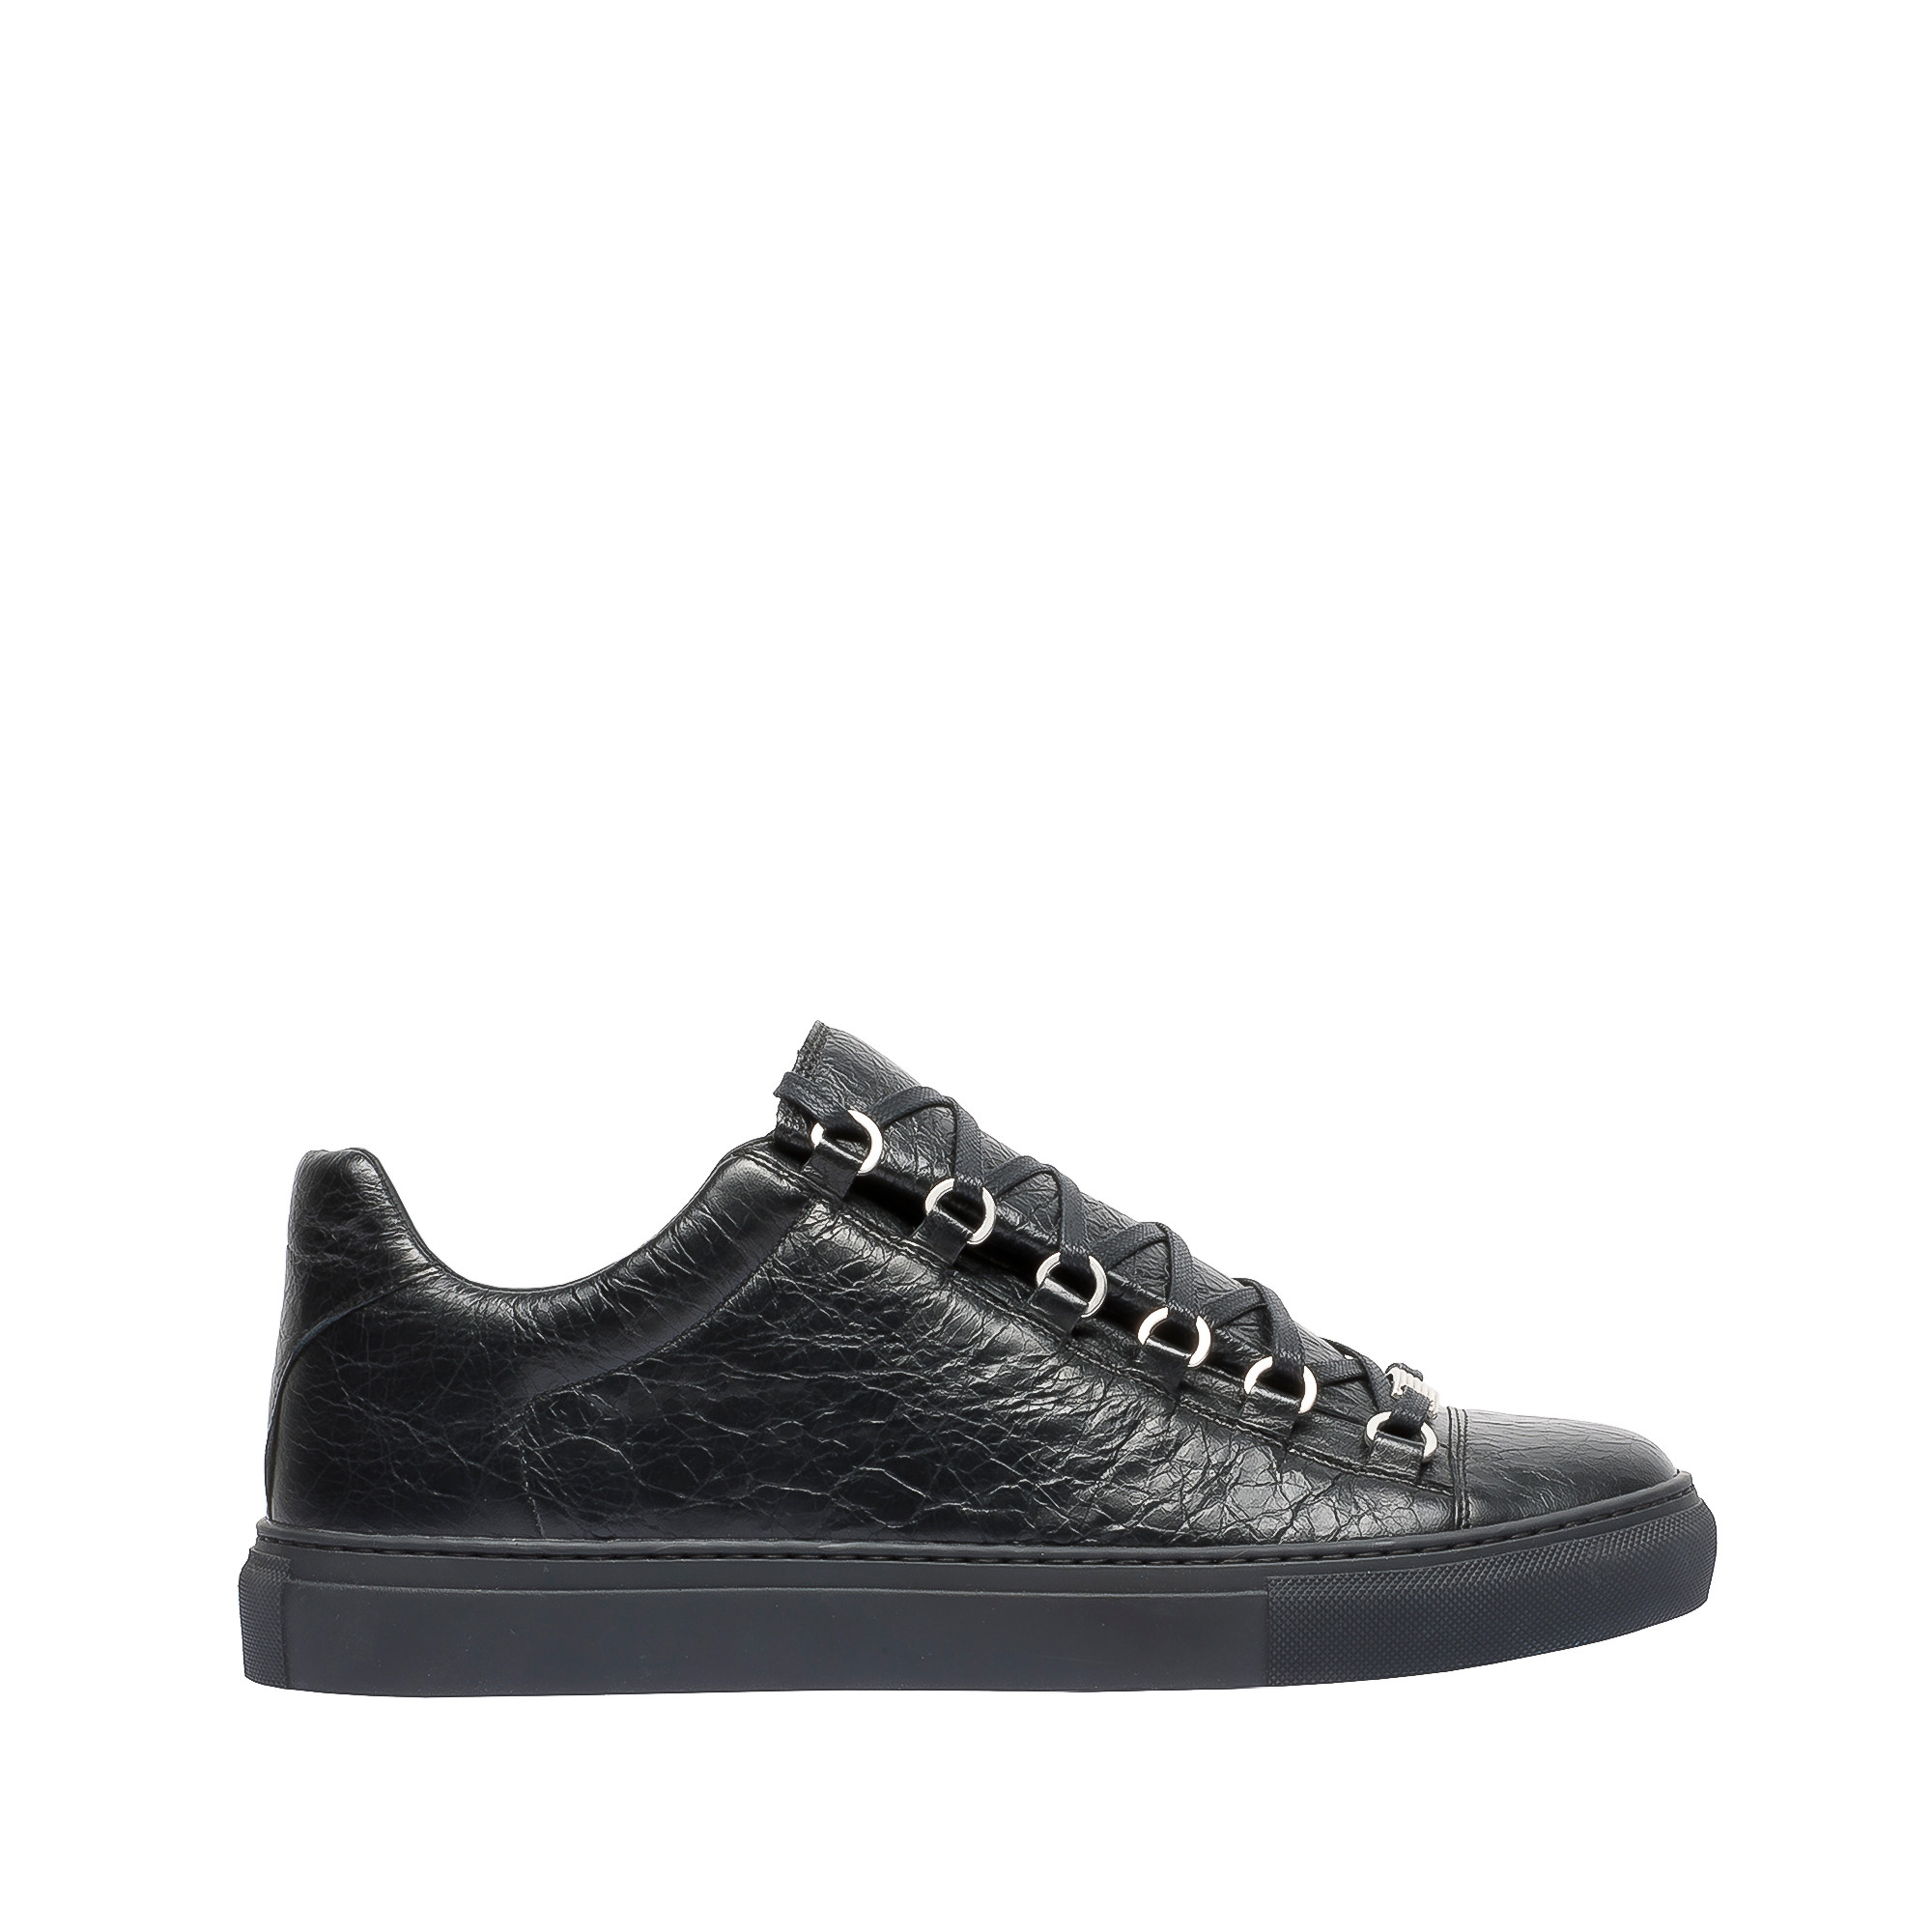 Balenciaga Arena Lamb Leather Low-Top Sneakers in Black | Lyst